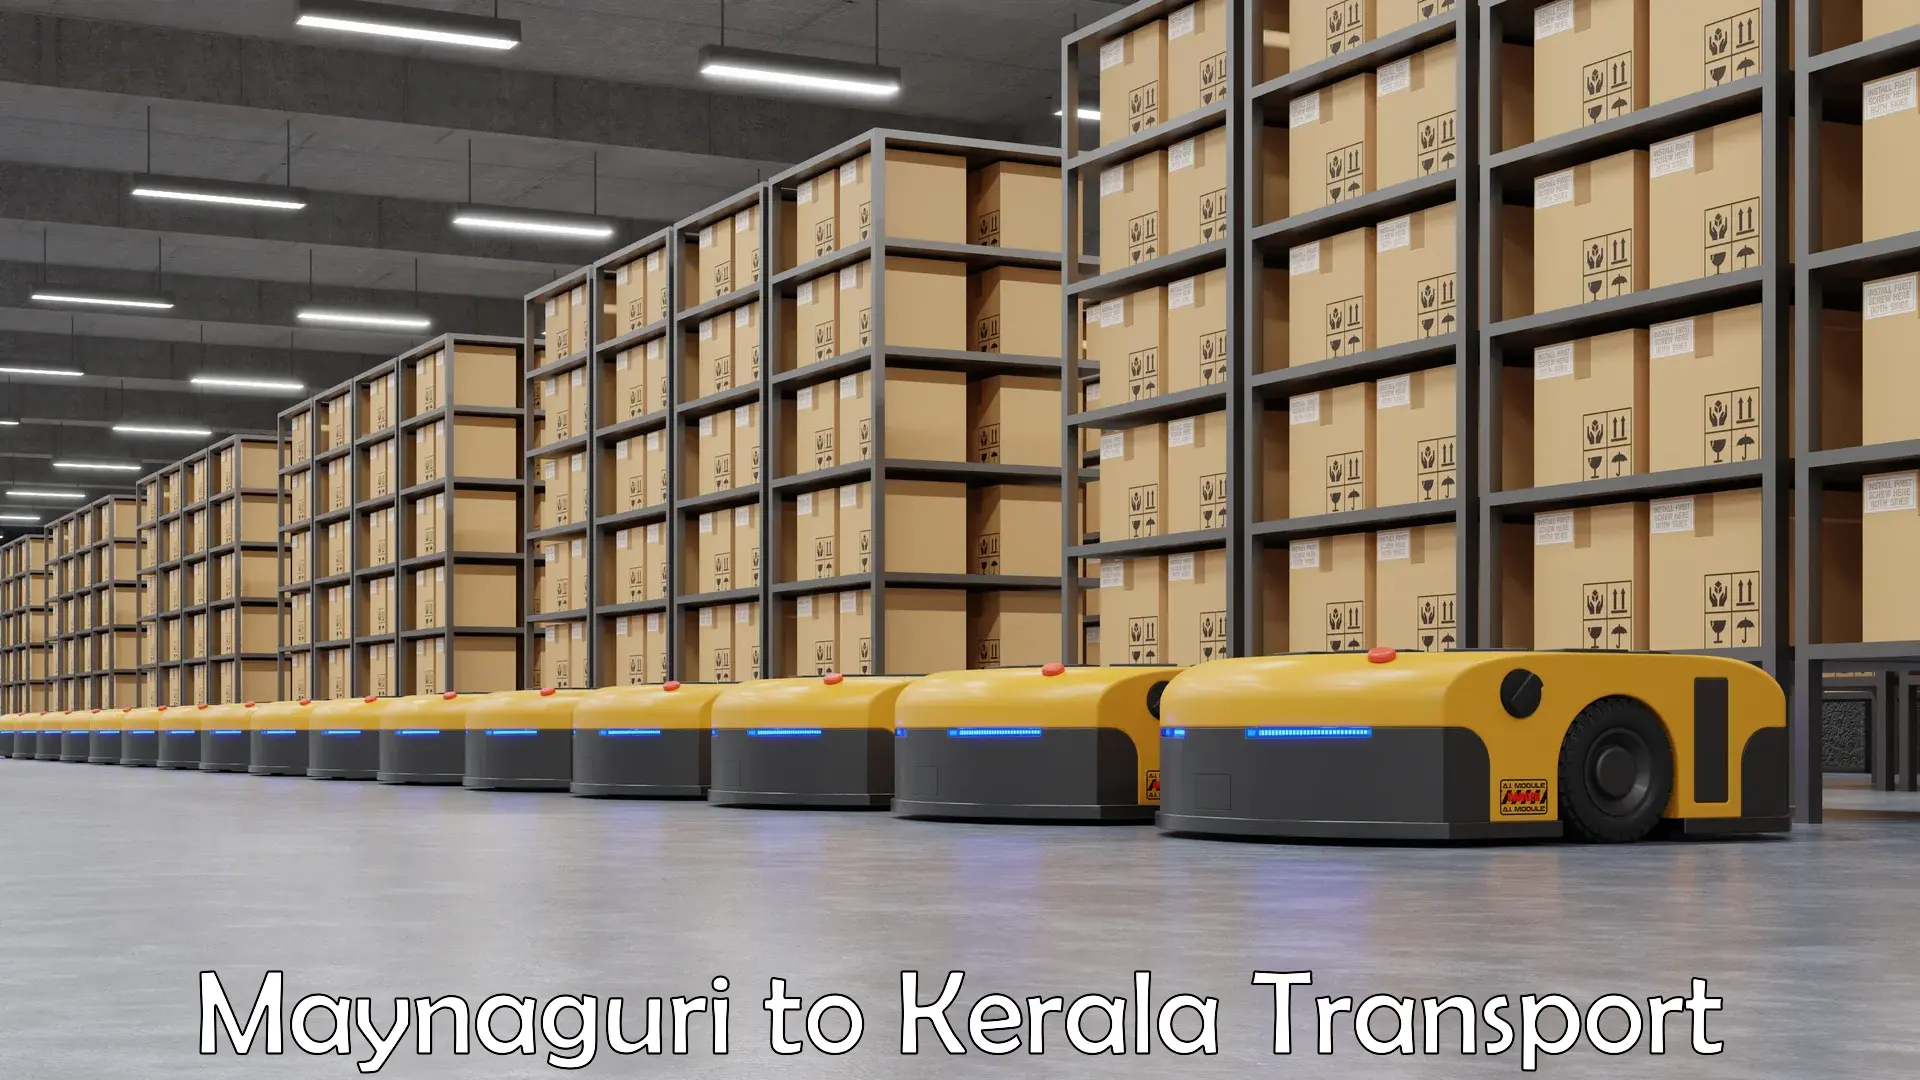 Truck transport companies in India Maynaguri to Chalakudy